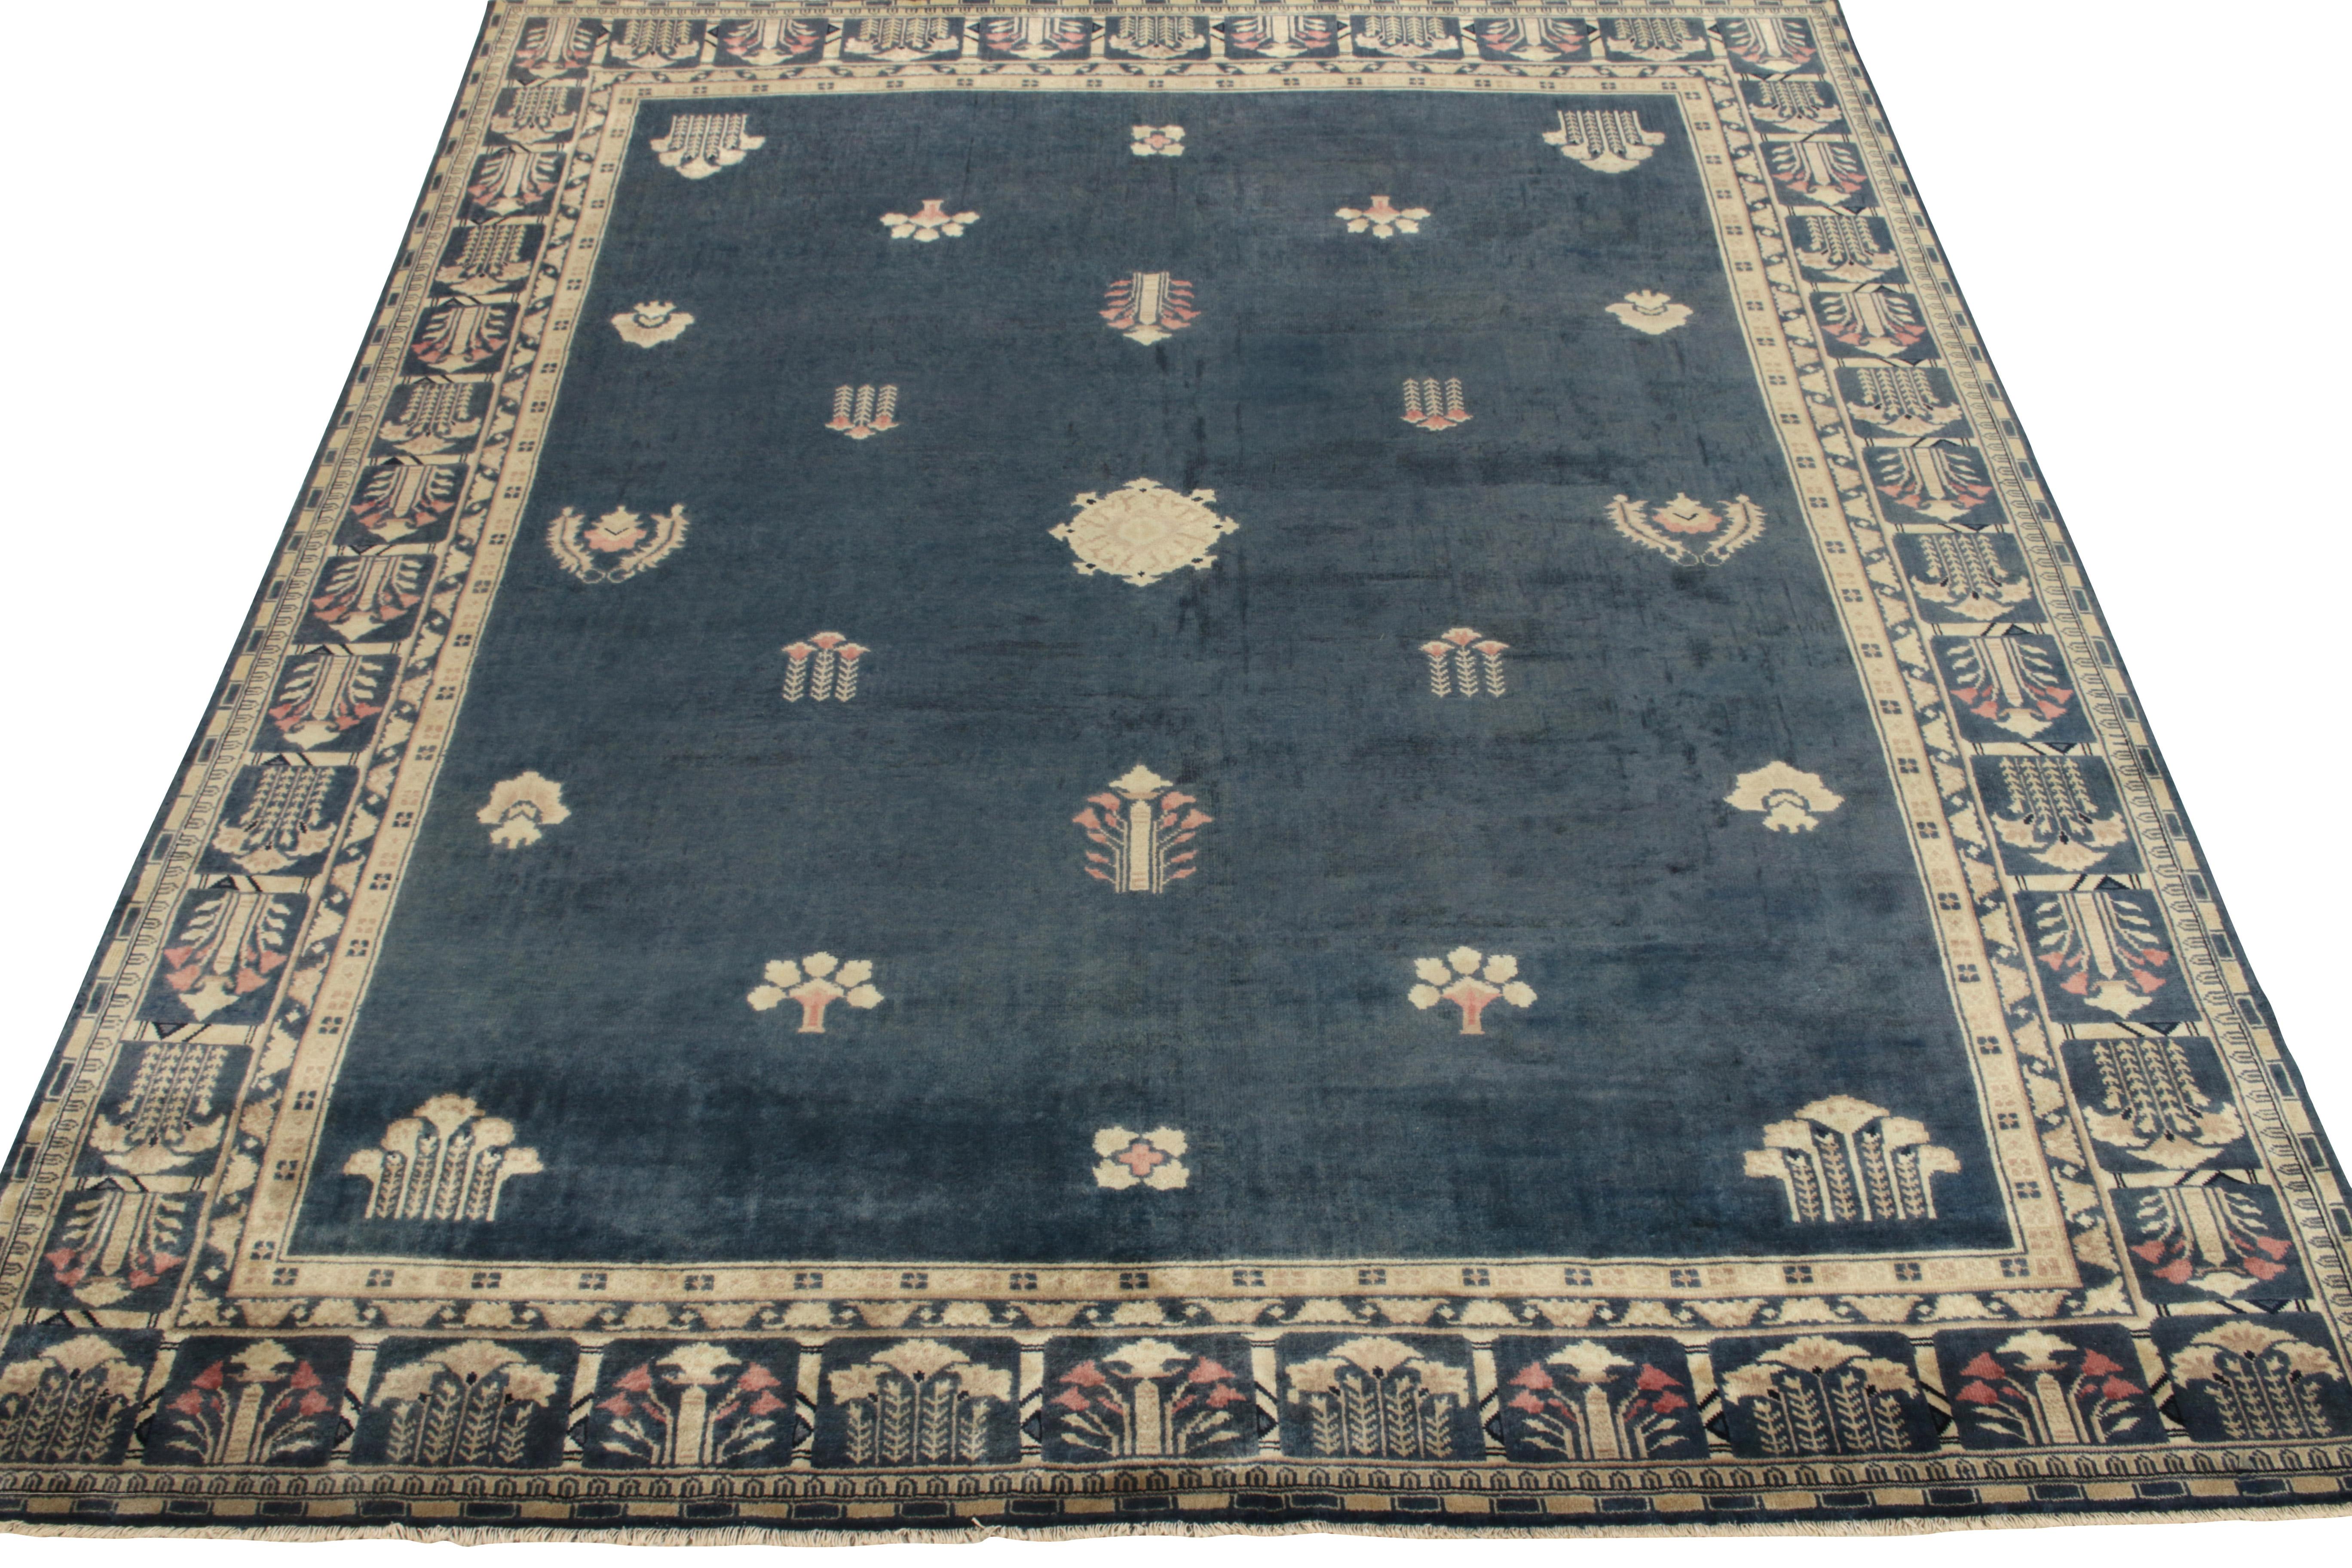 An 8x10 vintage rug exemplifying 1920s Chinese Art Deco sensibilities, featuring intricate floral patterns on field & border alike in tones of pale yellow, beige-brown & blush red on a lush blue background inviting an enticing play of light.